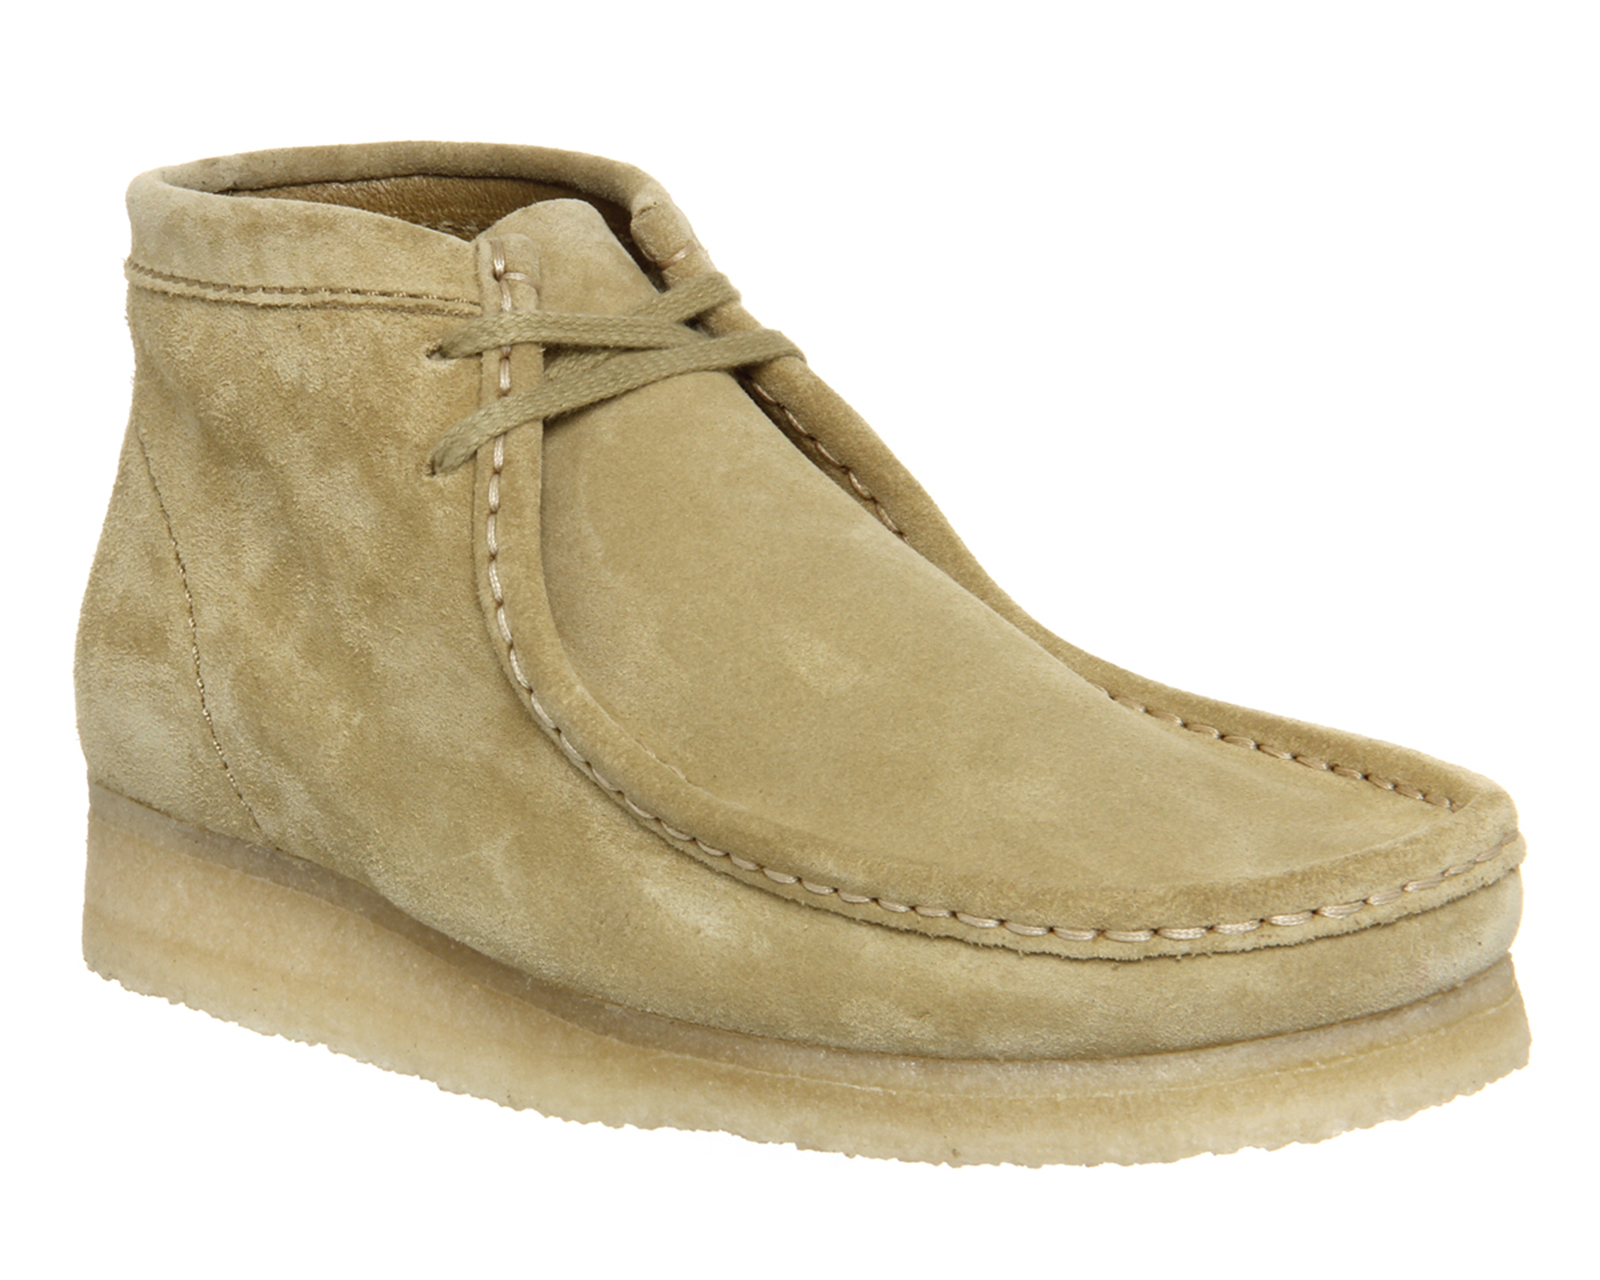 clarks wallabee boots uk